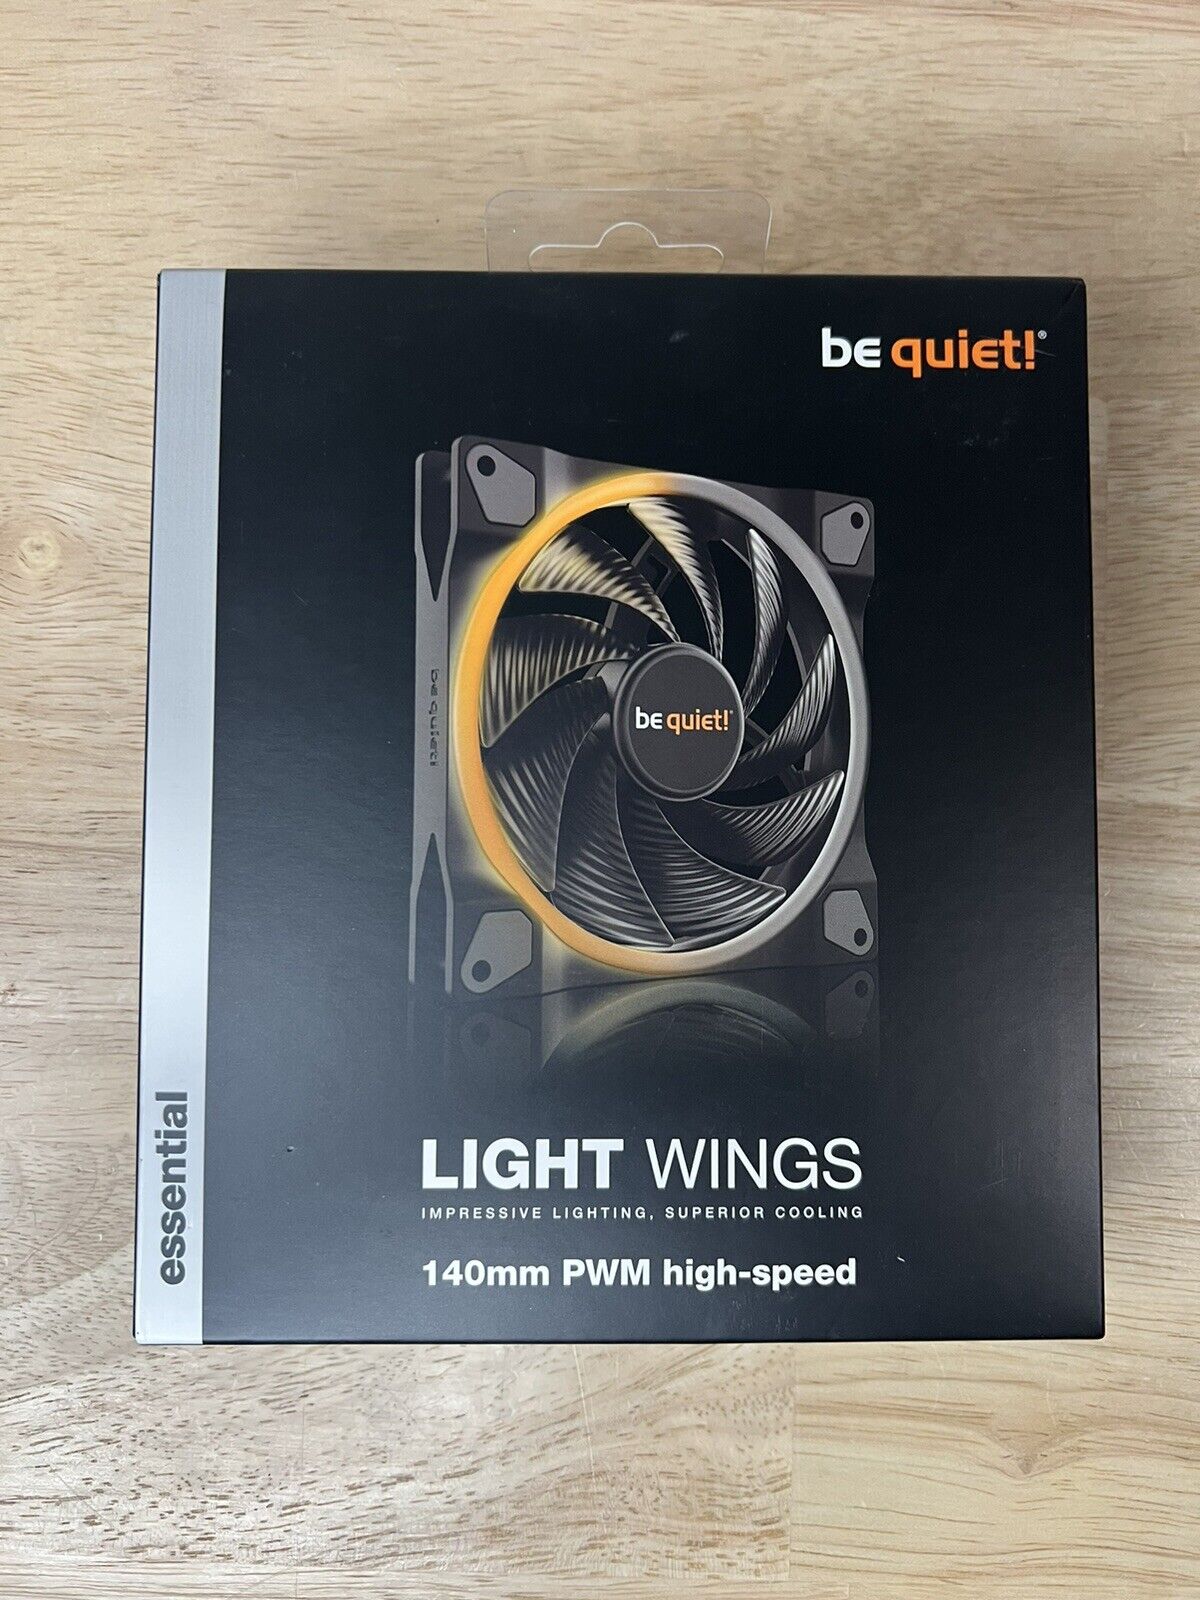 be quiet Light Wings 140mm PWM high-speed, Premium ARGB Cooling Fan, 4-Pin,